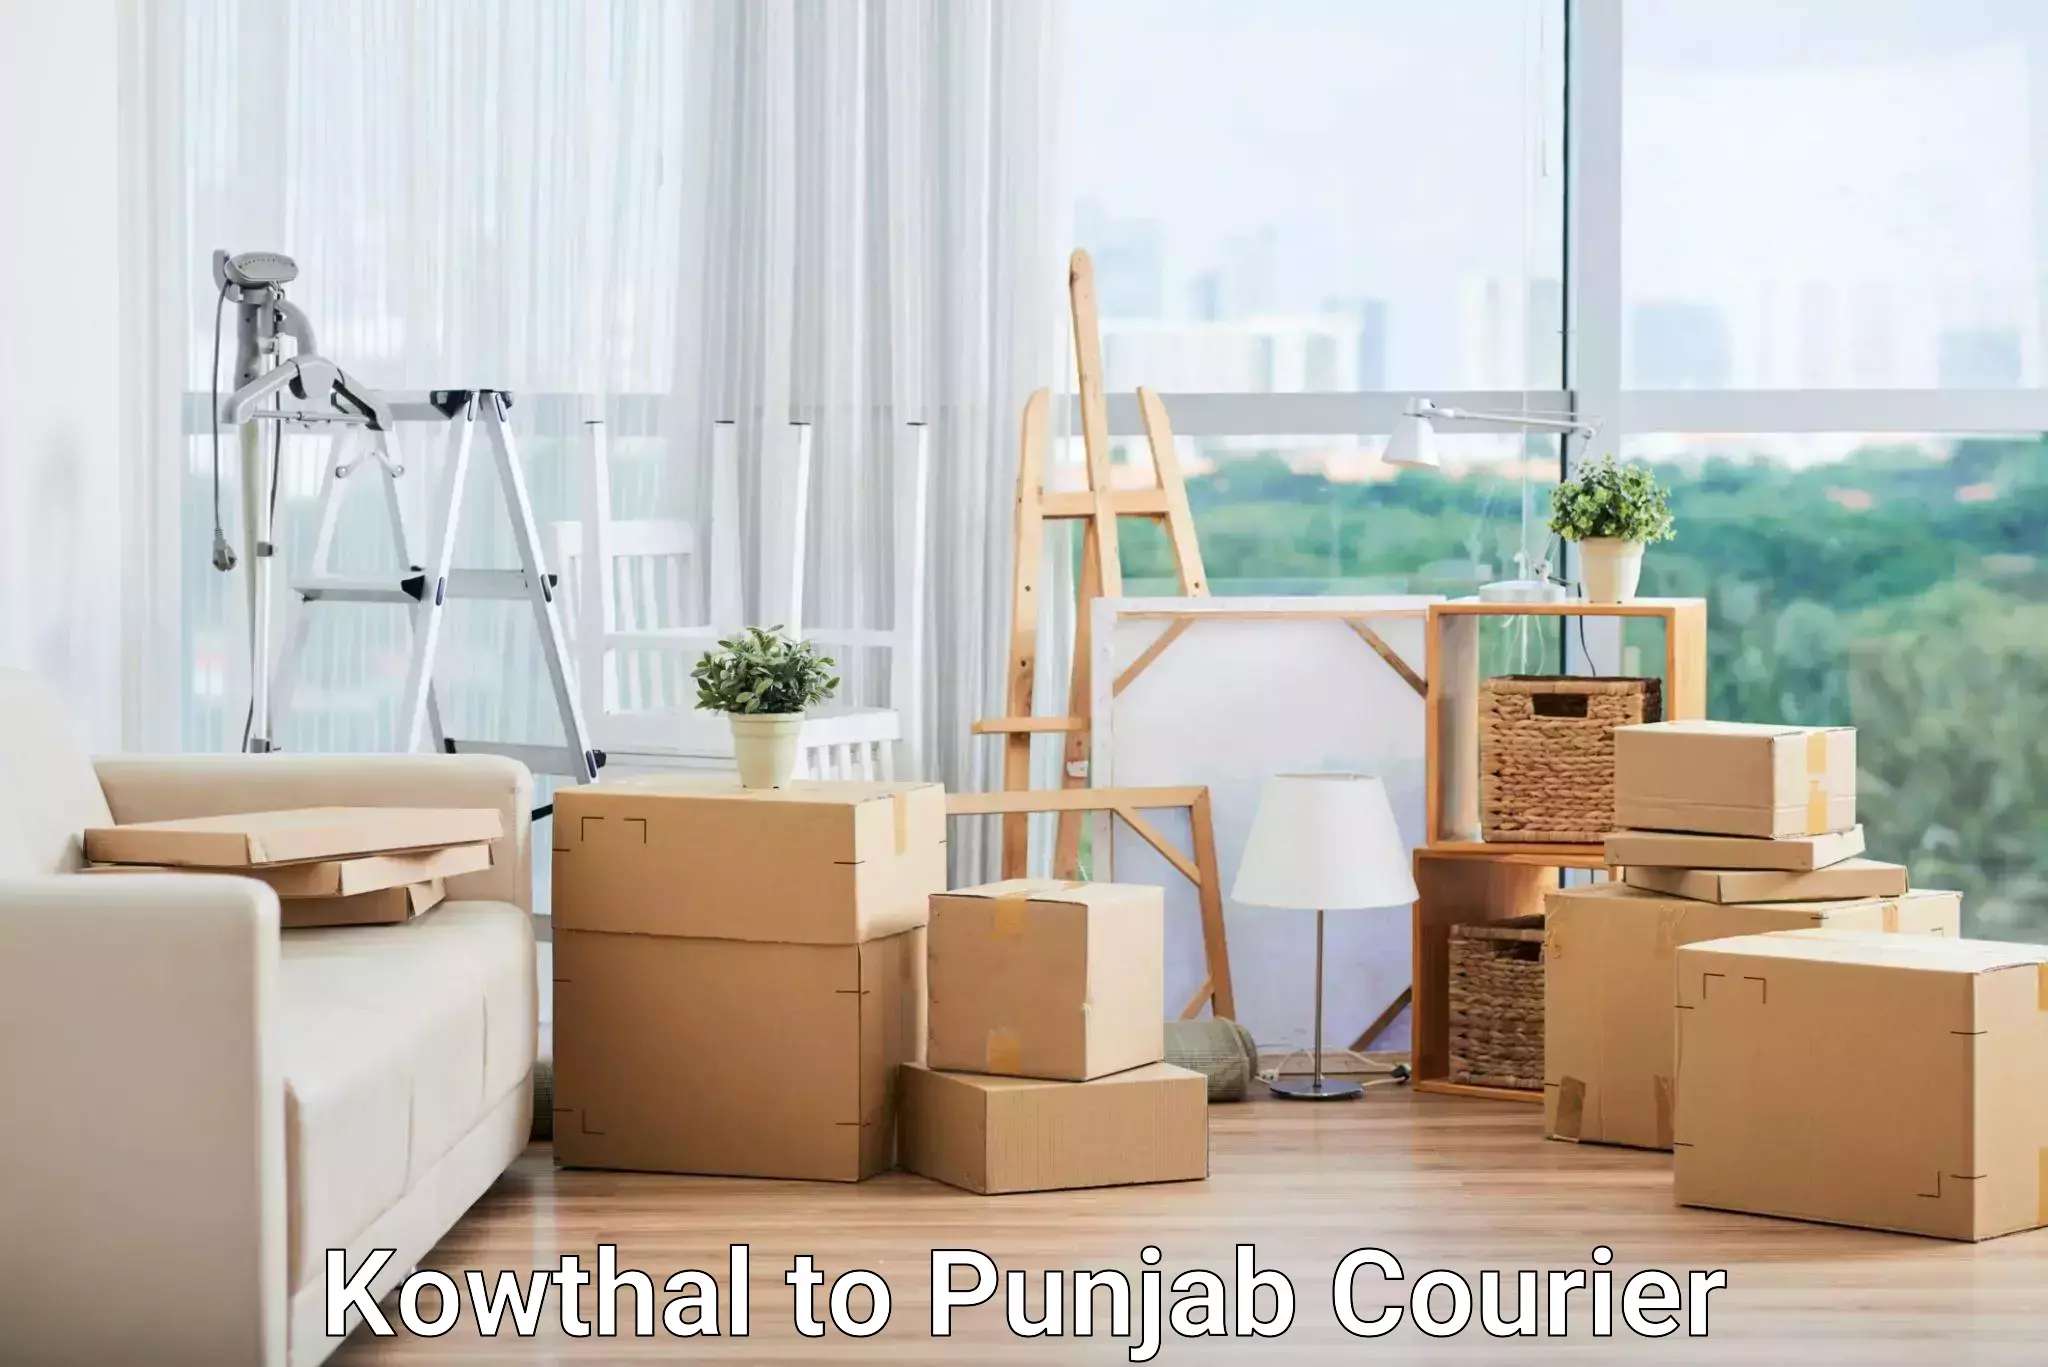 Advanced shipping services Kowthal to Jalandhar